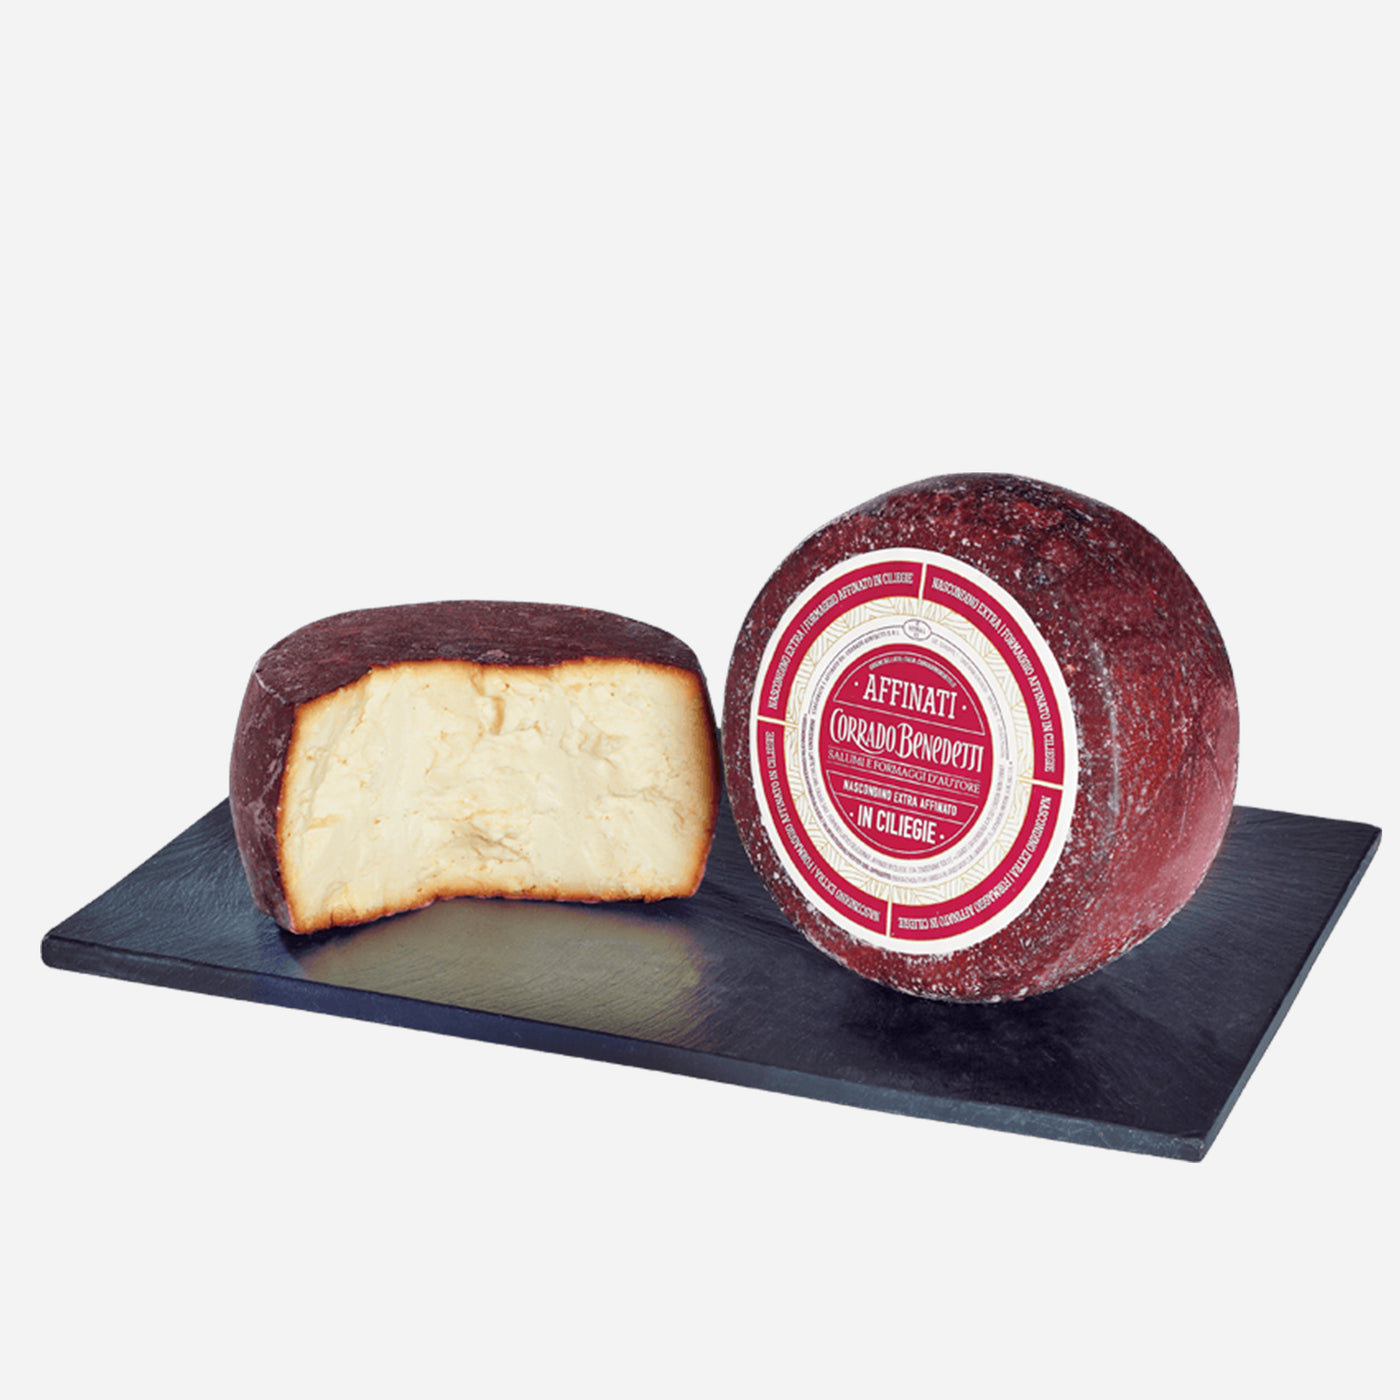 Cheese Aged in Cherries - 12 Months